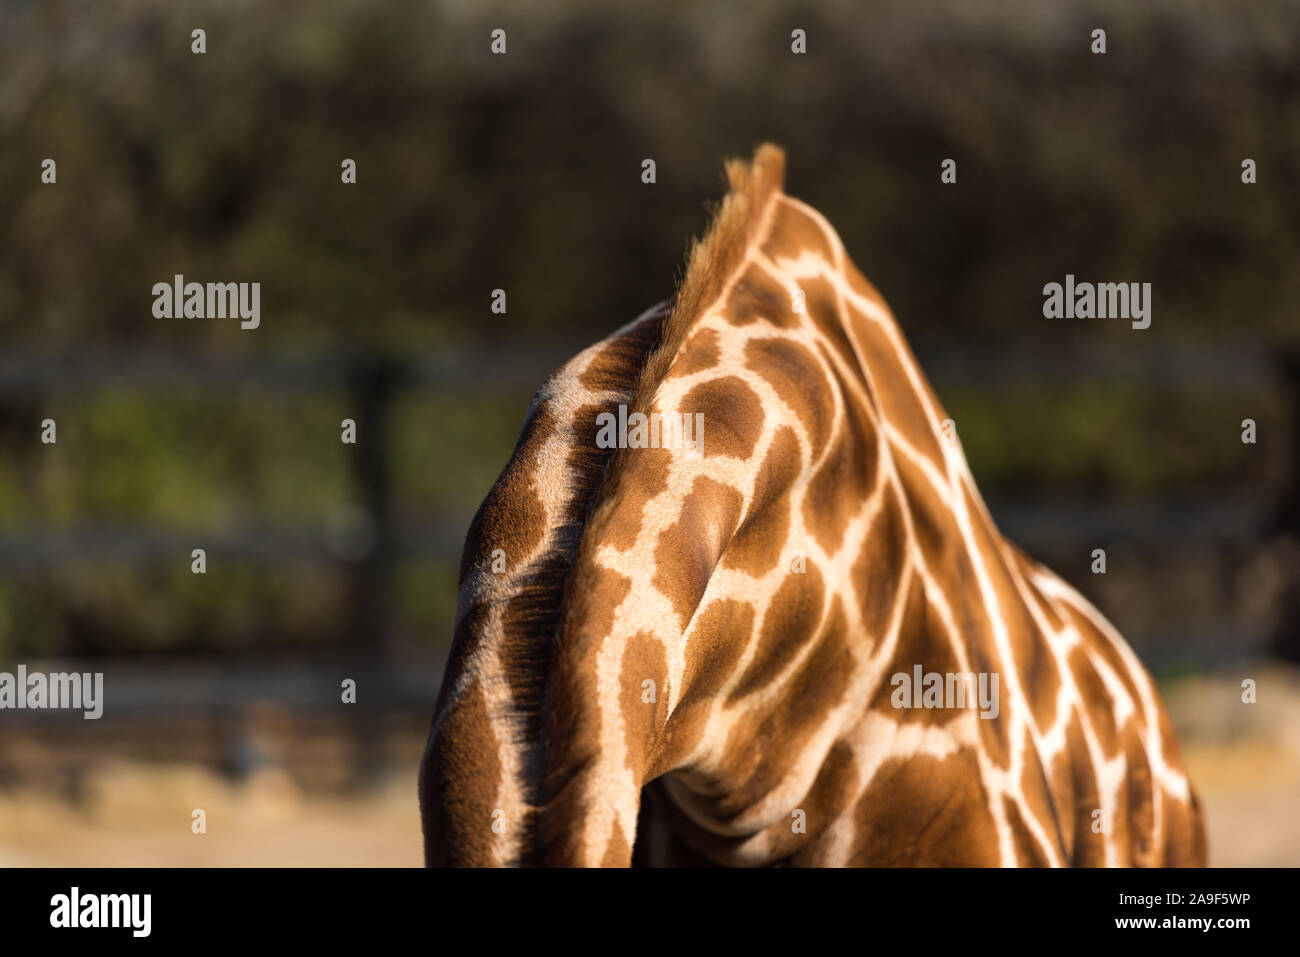 Close up of giraffe's skin with spots and mane. African wildlife Stock Photo